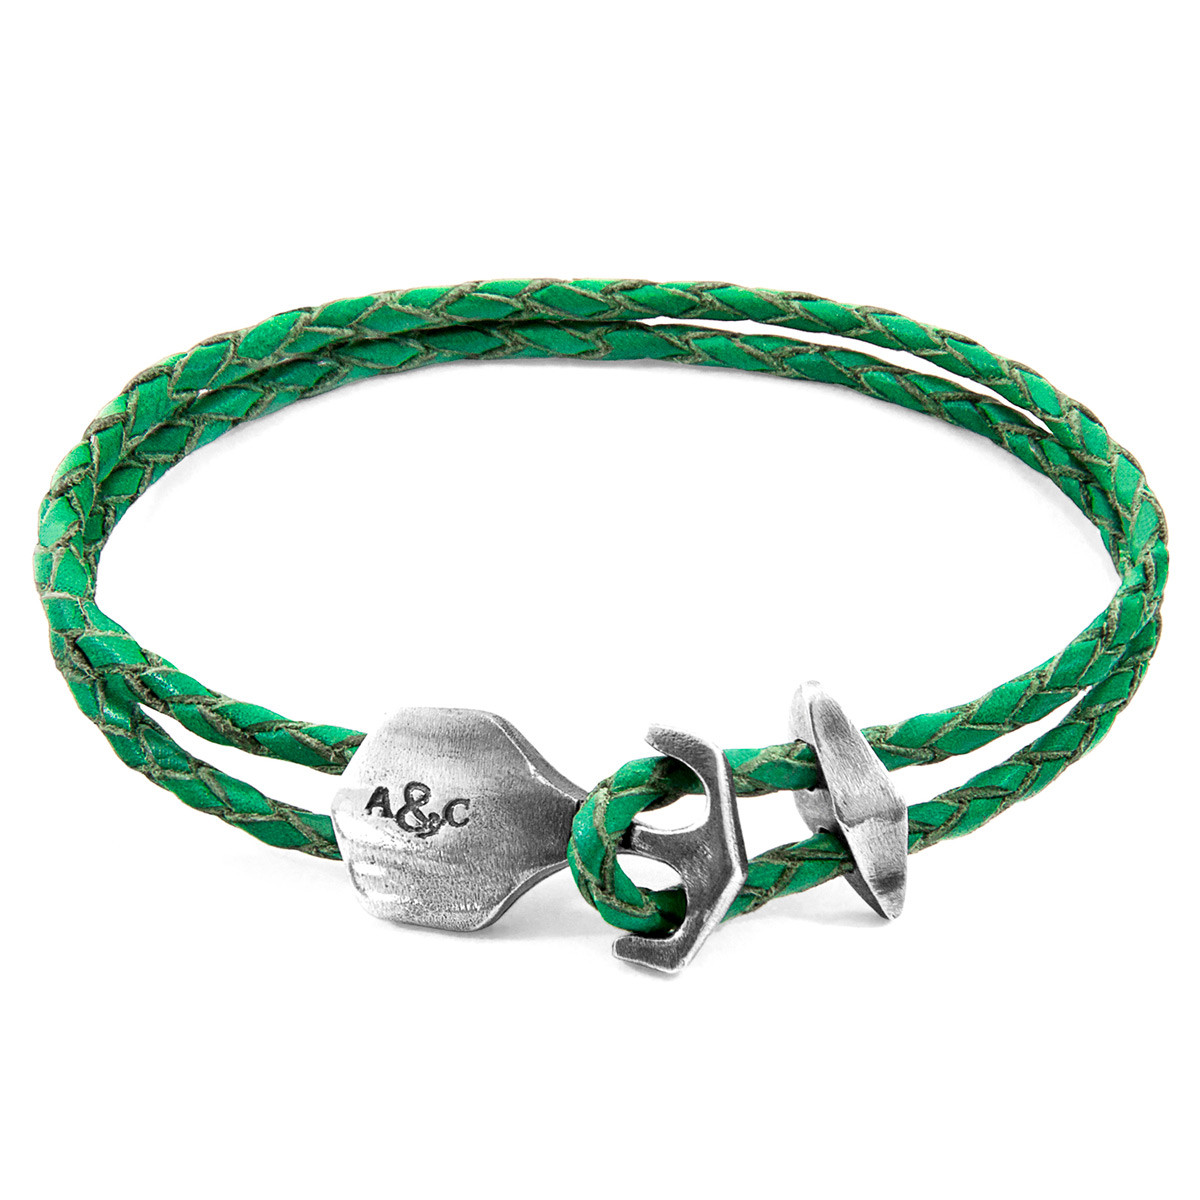 Fern Green Delta Anchor Silver and Braided Leather Bracelet